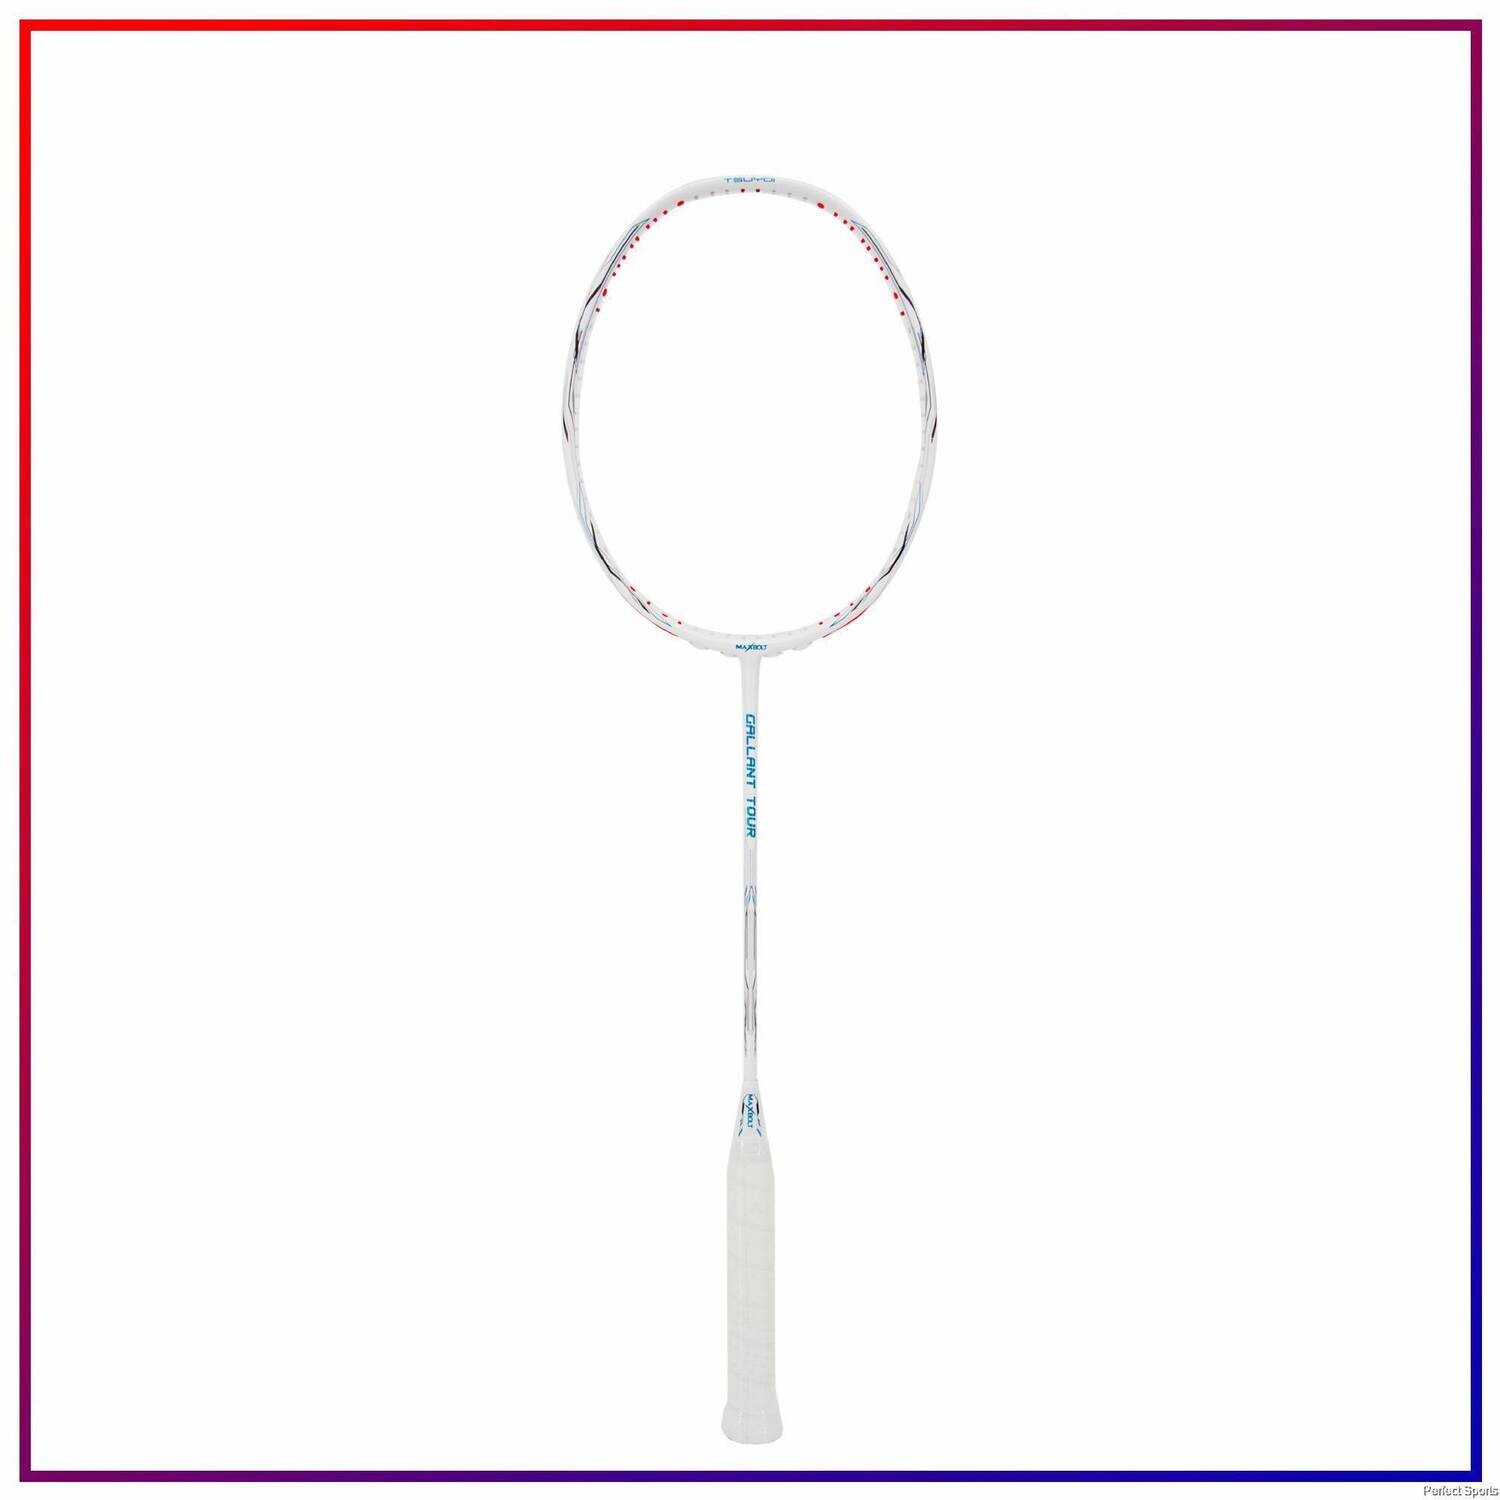 MaxBolt Gallant Tour White Badminton Racquet- with Full Cover